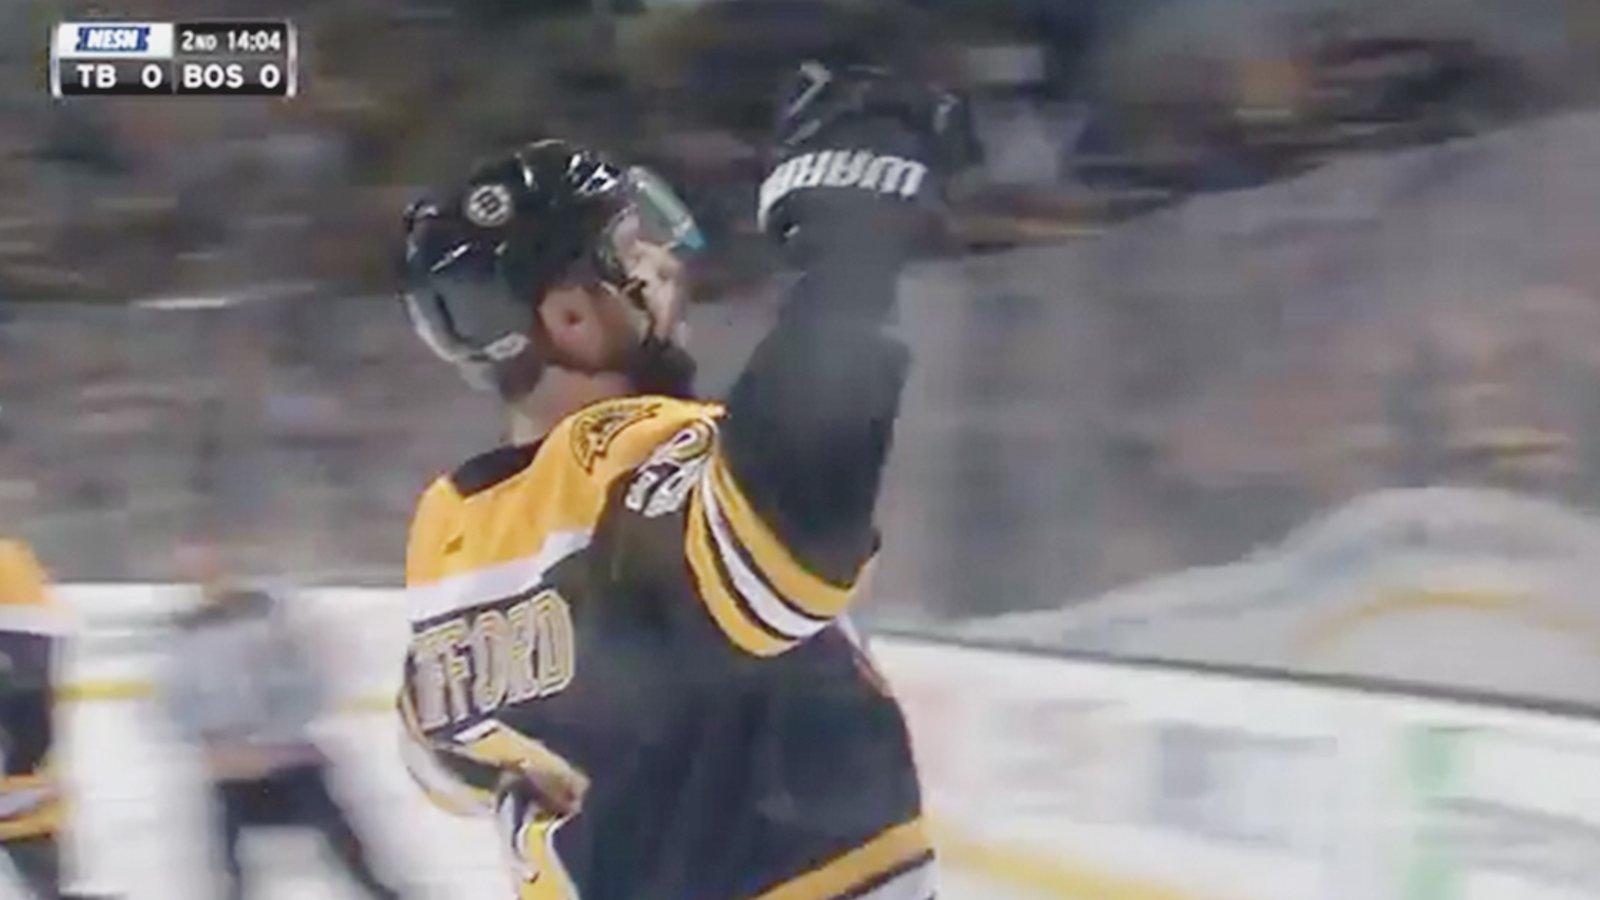 MUST SEE: Stafford roofs opening goal for the Bruins